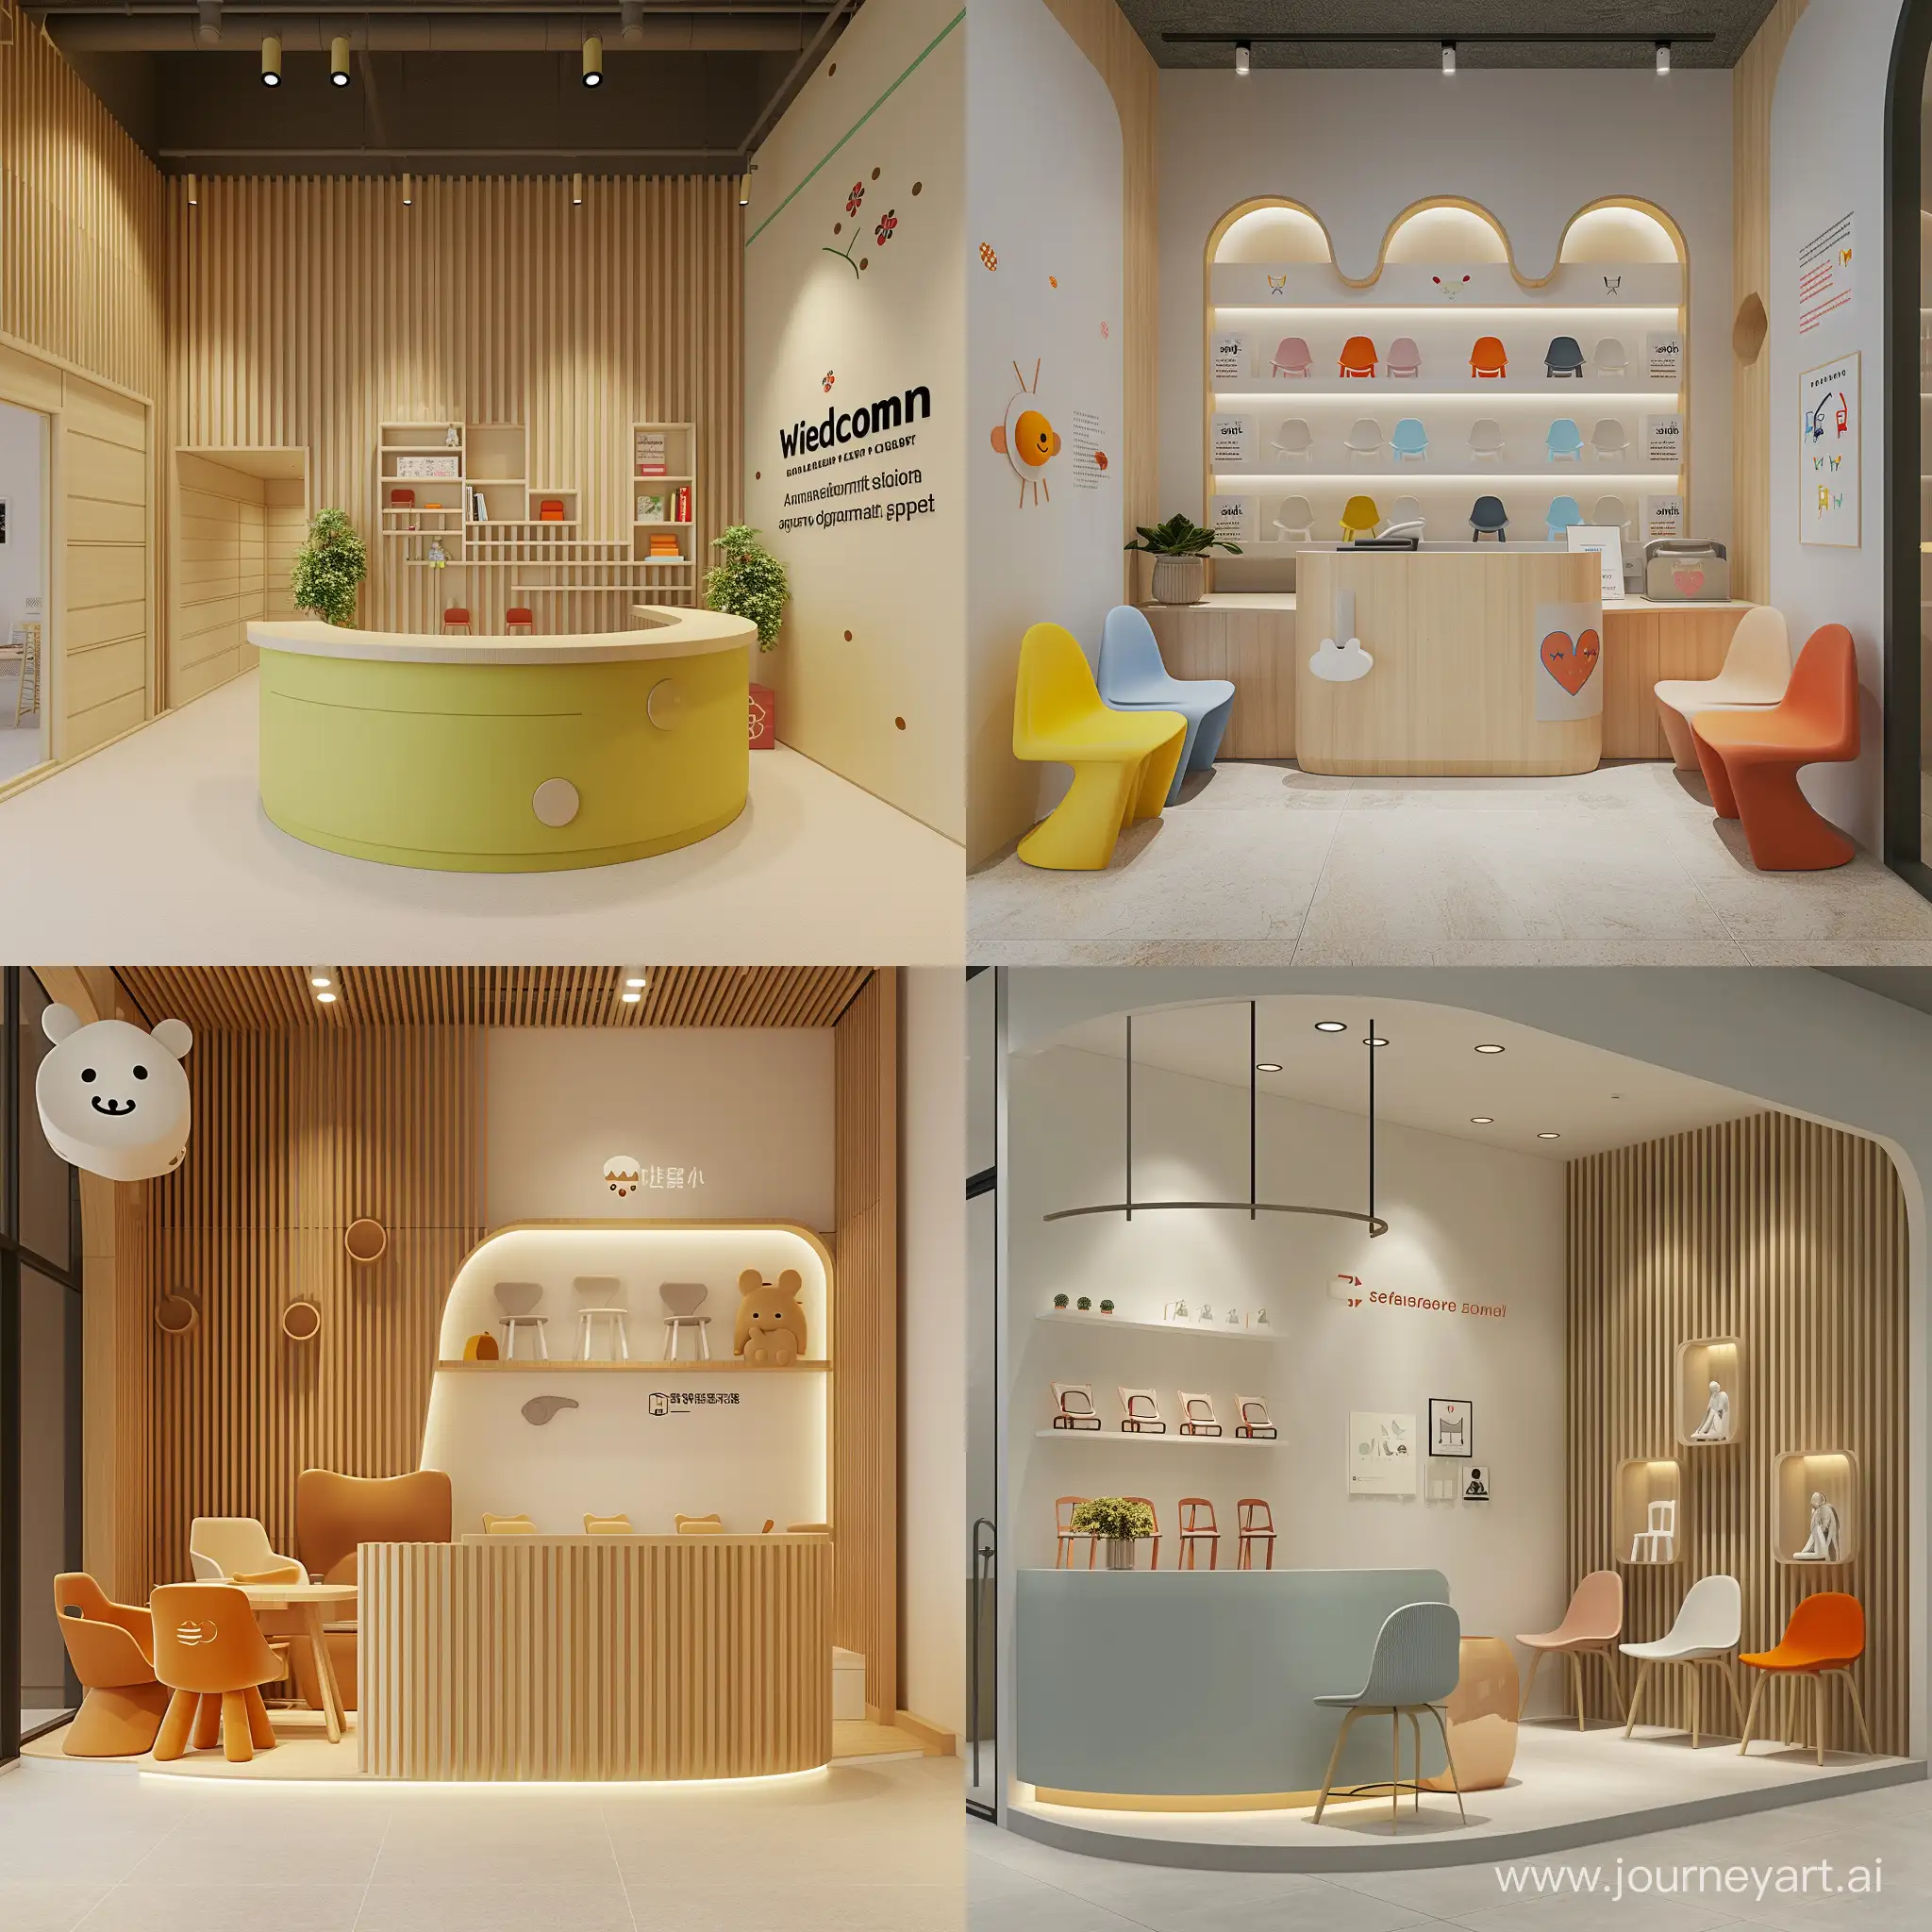 create me an image of Entrance Area (Welcome Zone and Story Wall) of kids chair showroom
Purpose: A welcoming area and an informative space about the chair collections.
Estimated Area: Approximately 10% of the total space.
Size: Around 4.5 square meters.                                                                                                                                                                          Structure and Layout: Compact reception desk; a vertical story wall to minimize space usage.
Appearance: Welcoming; uses branding and design elements reflective of the sustainable ethos.realistic style